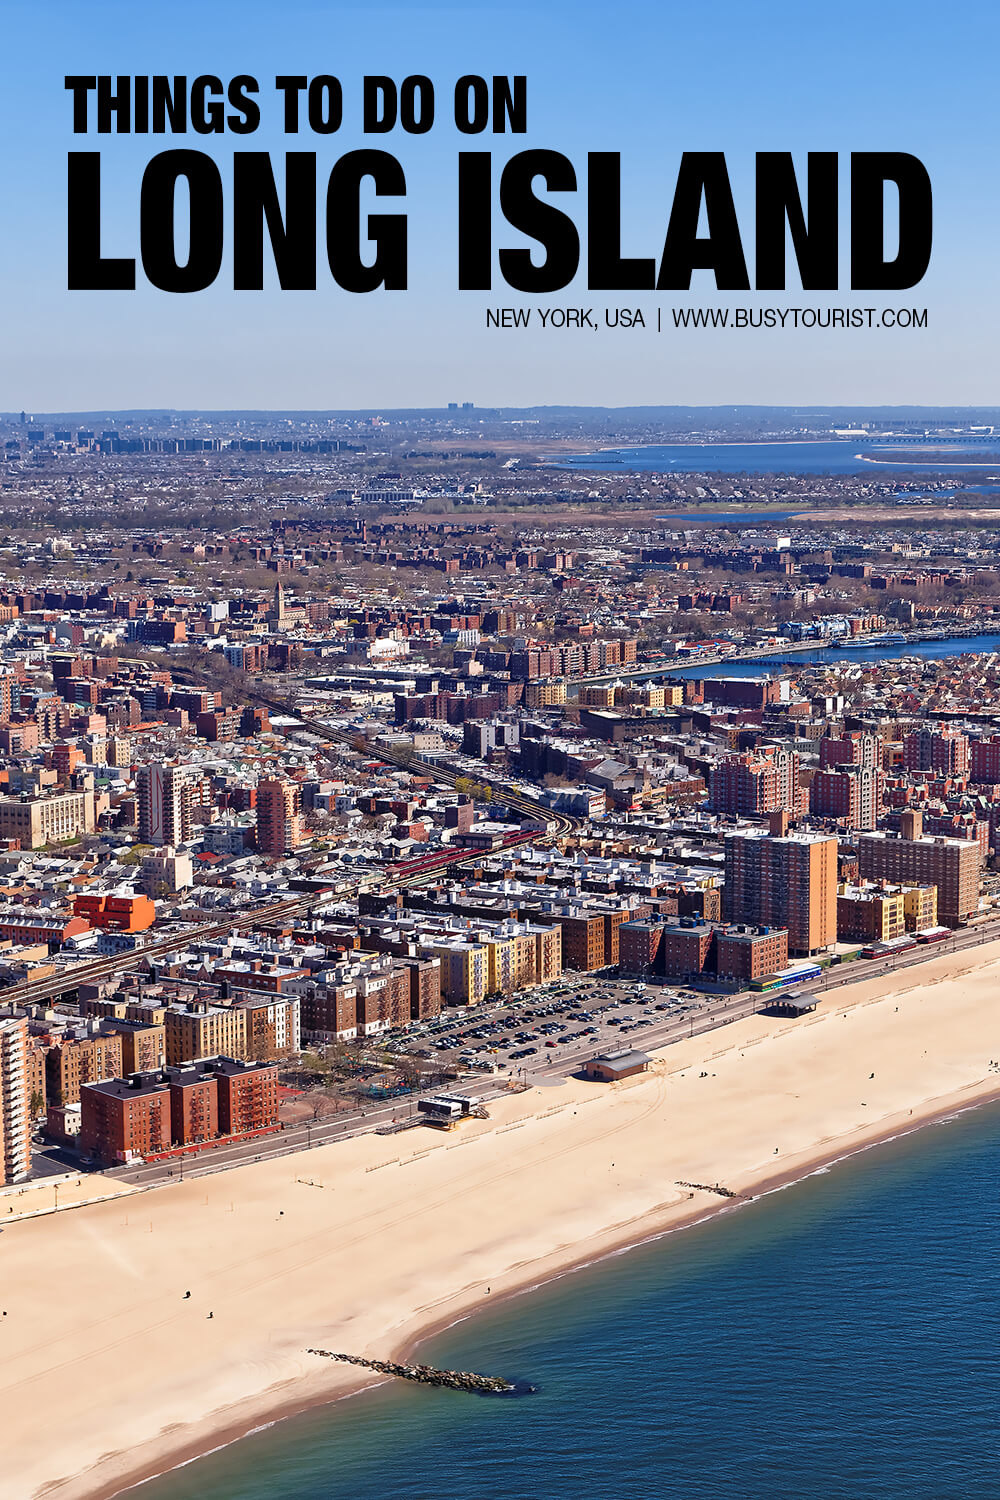 27 Best & Fun Things To Do On Long Island (NY) Attractions & Activities